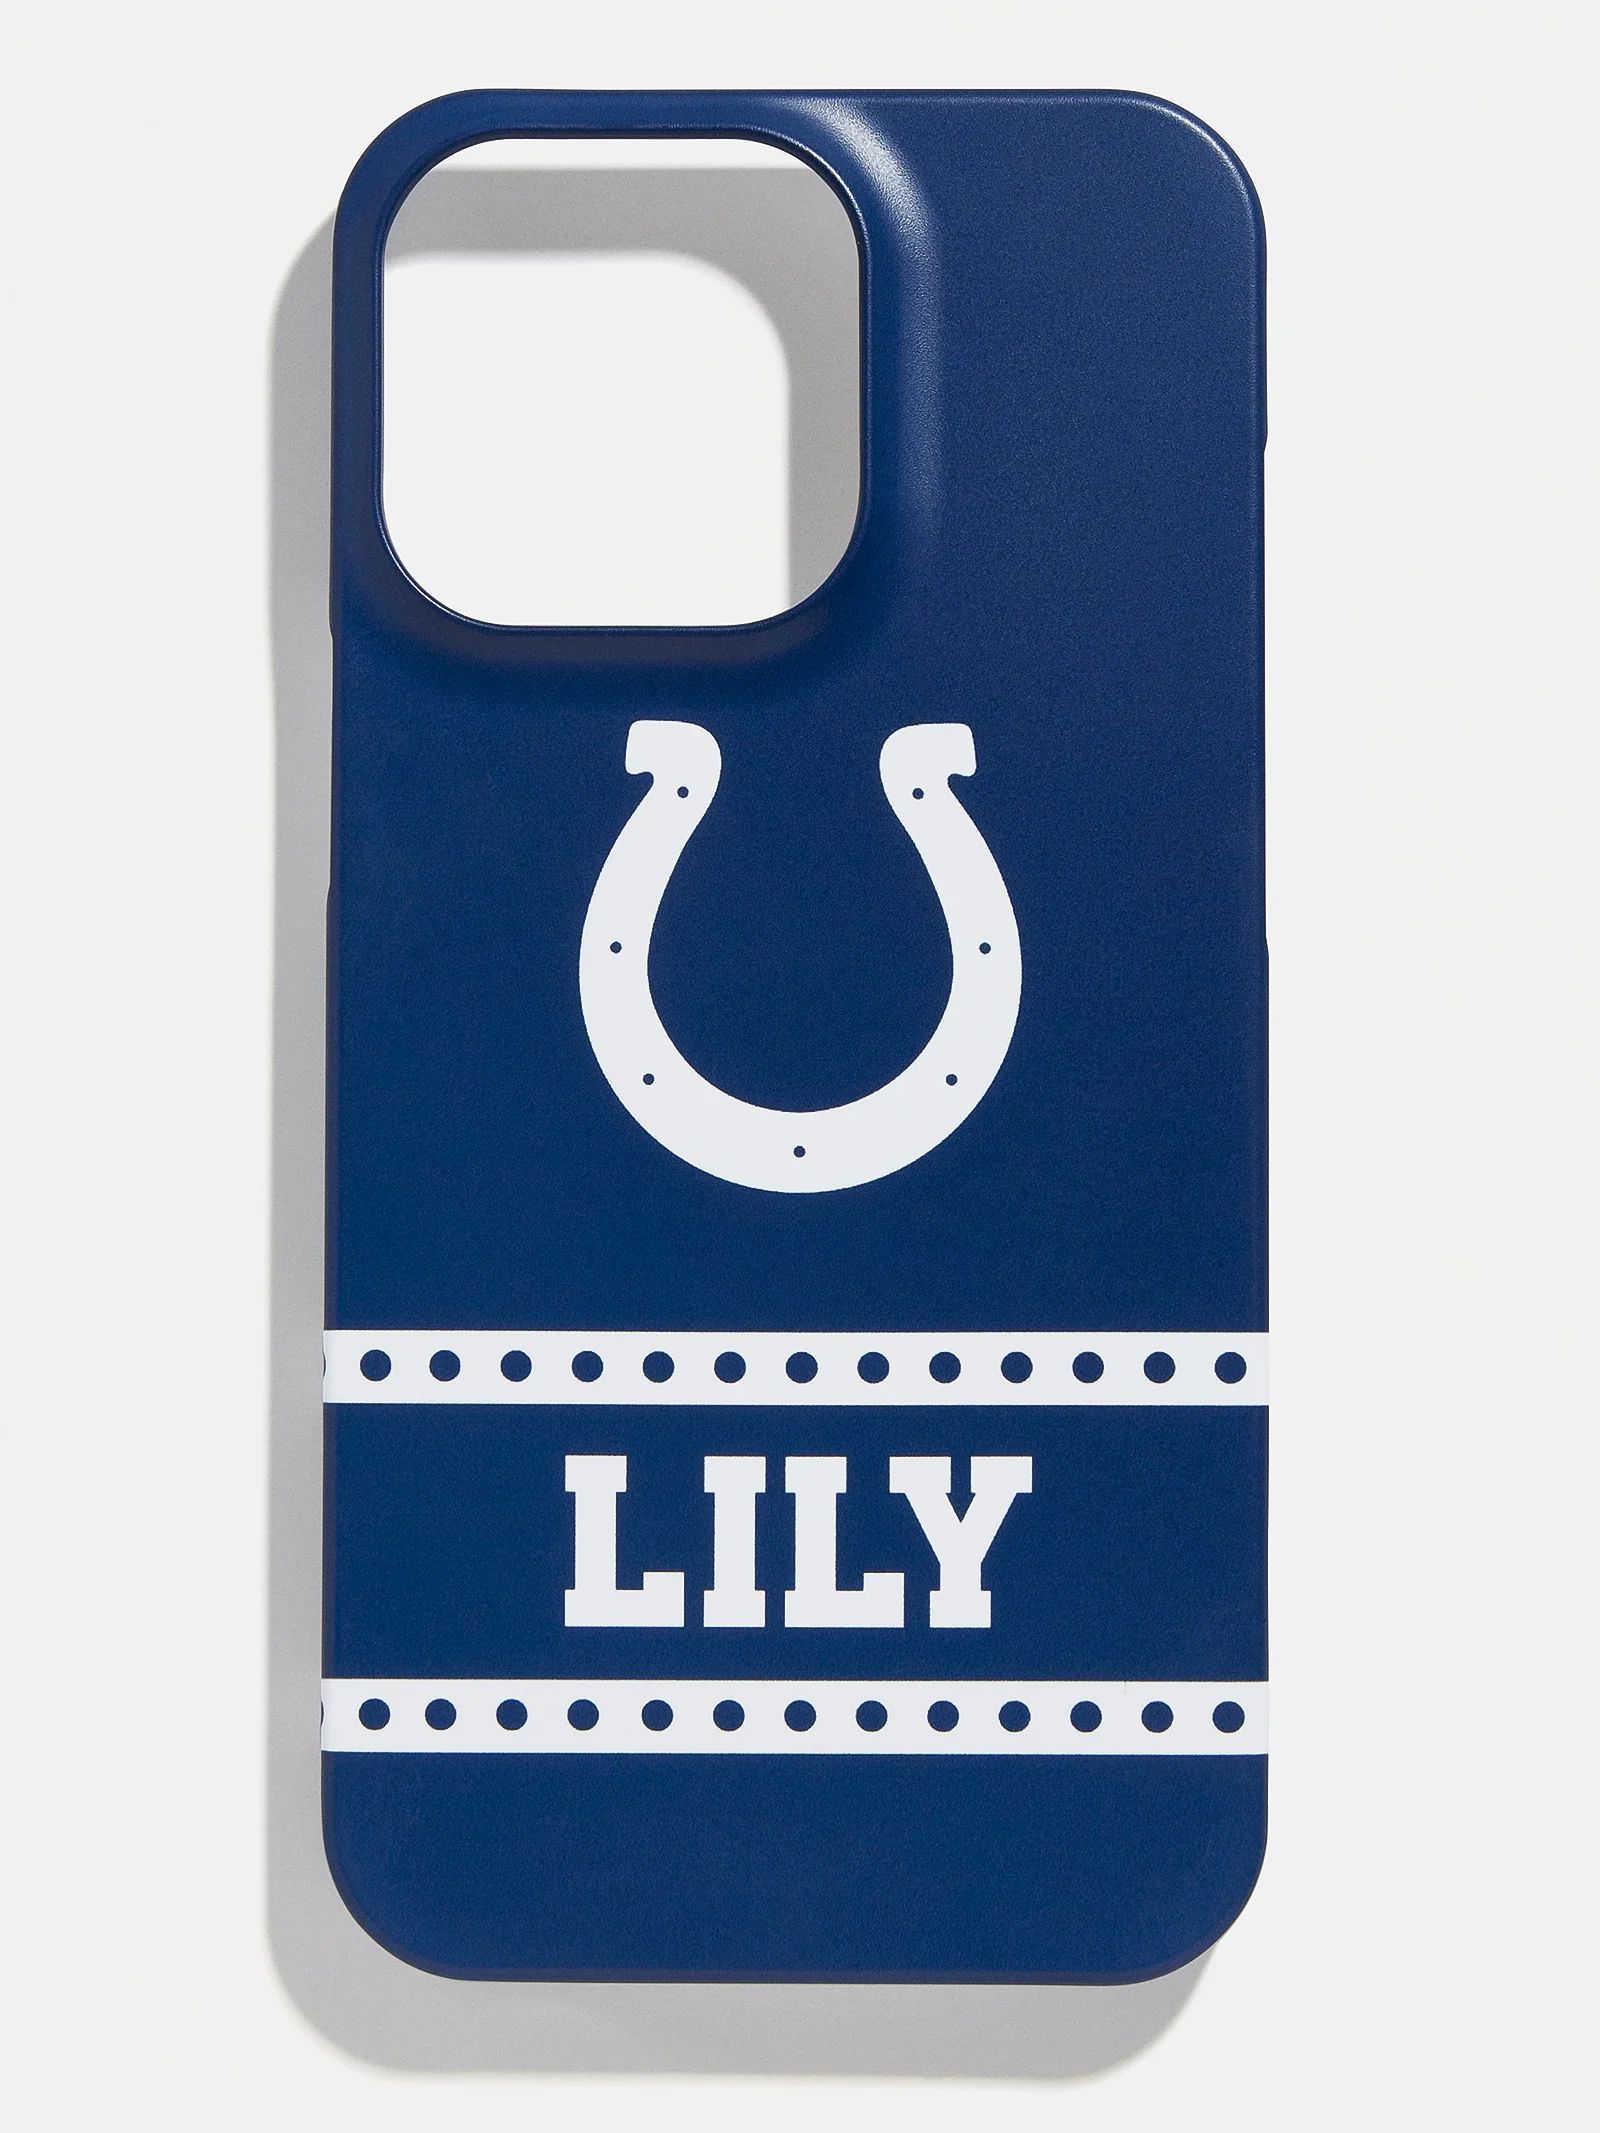 Indianapolis Colts NFL Custom iPhone Case: Blue | BaubleBar (US)